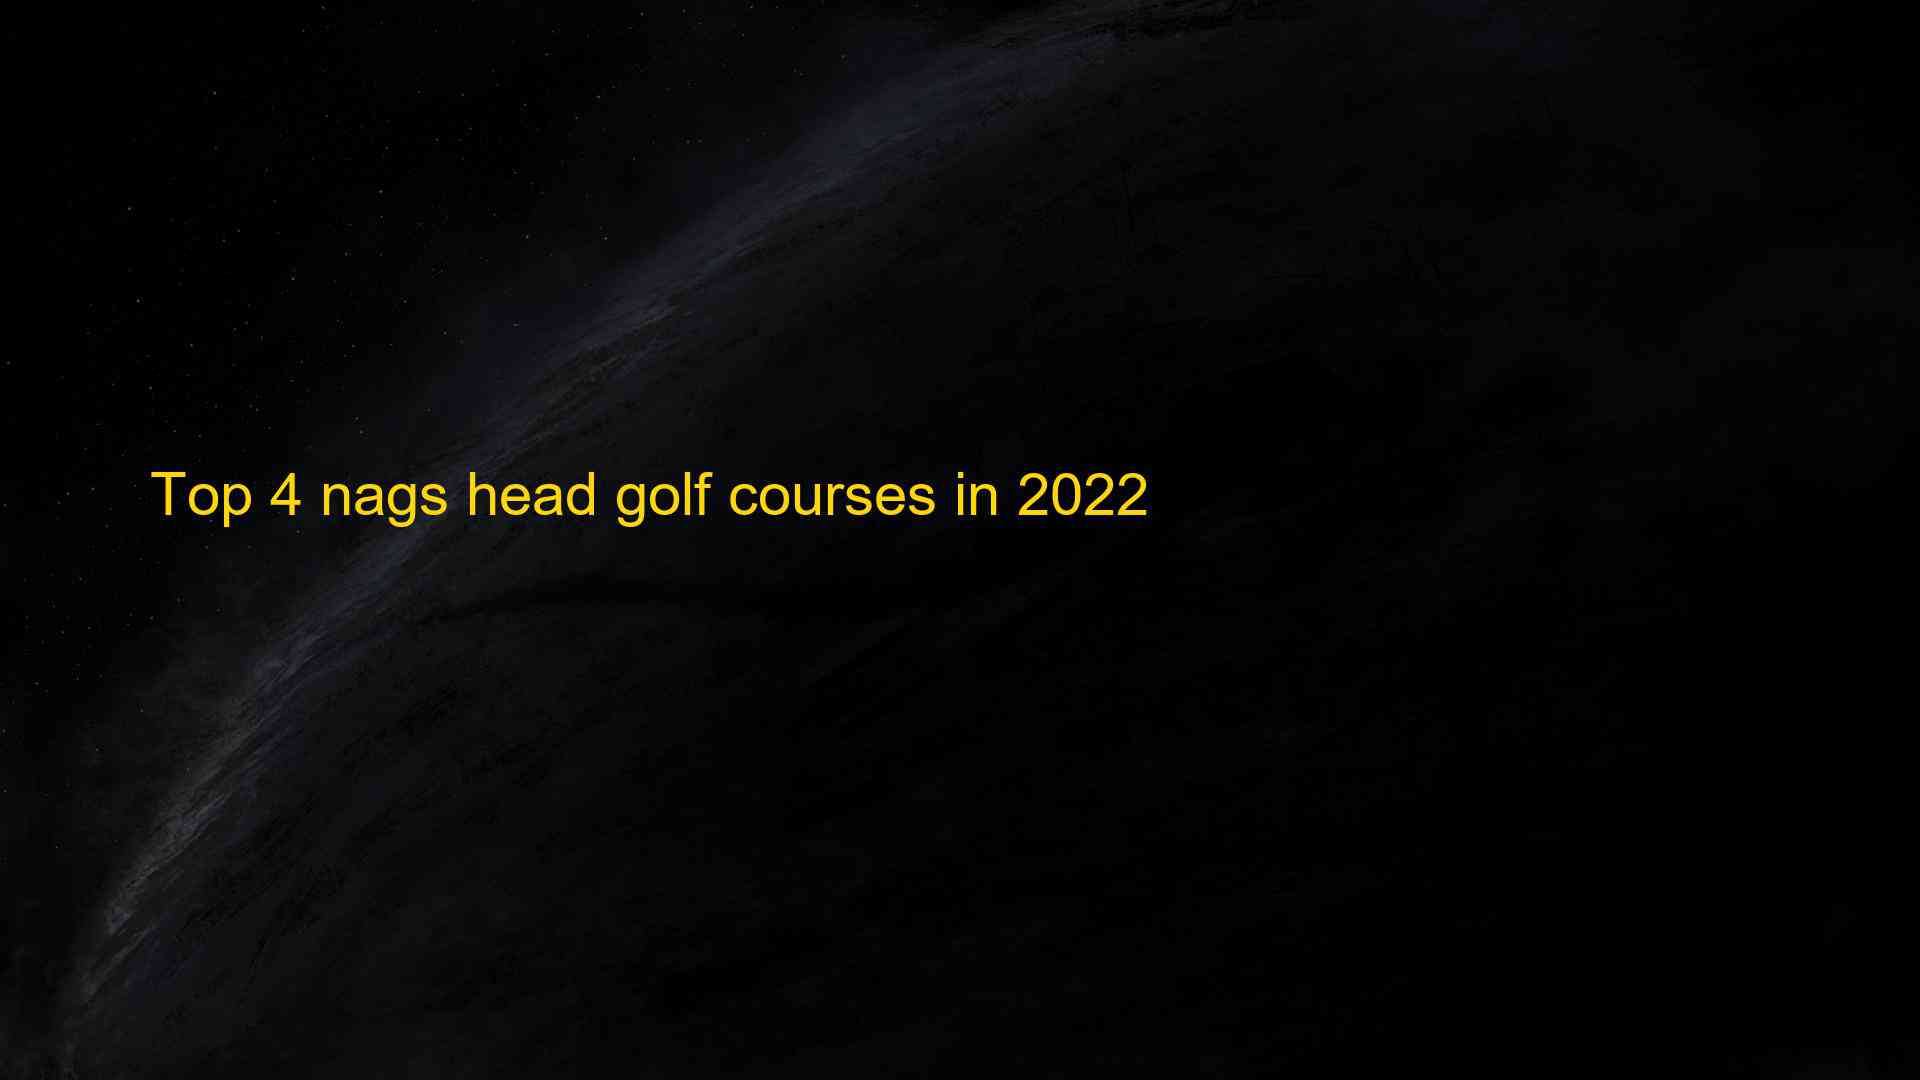 Top 4 nags head golf courses in 2022 1661791043